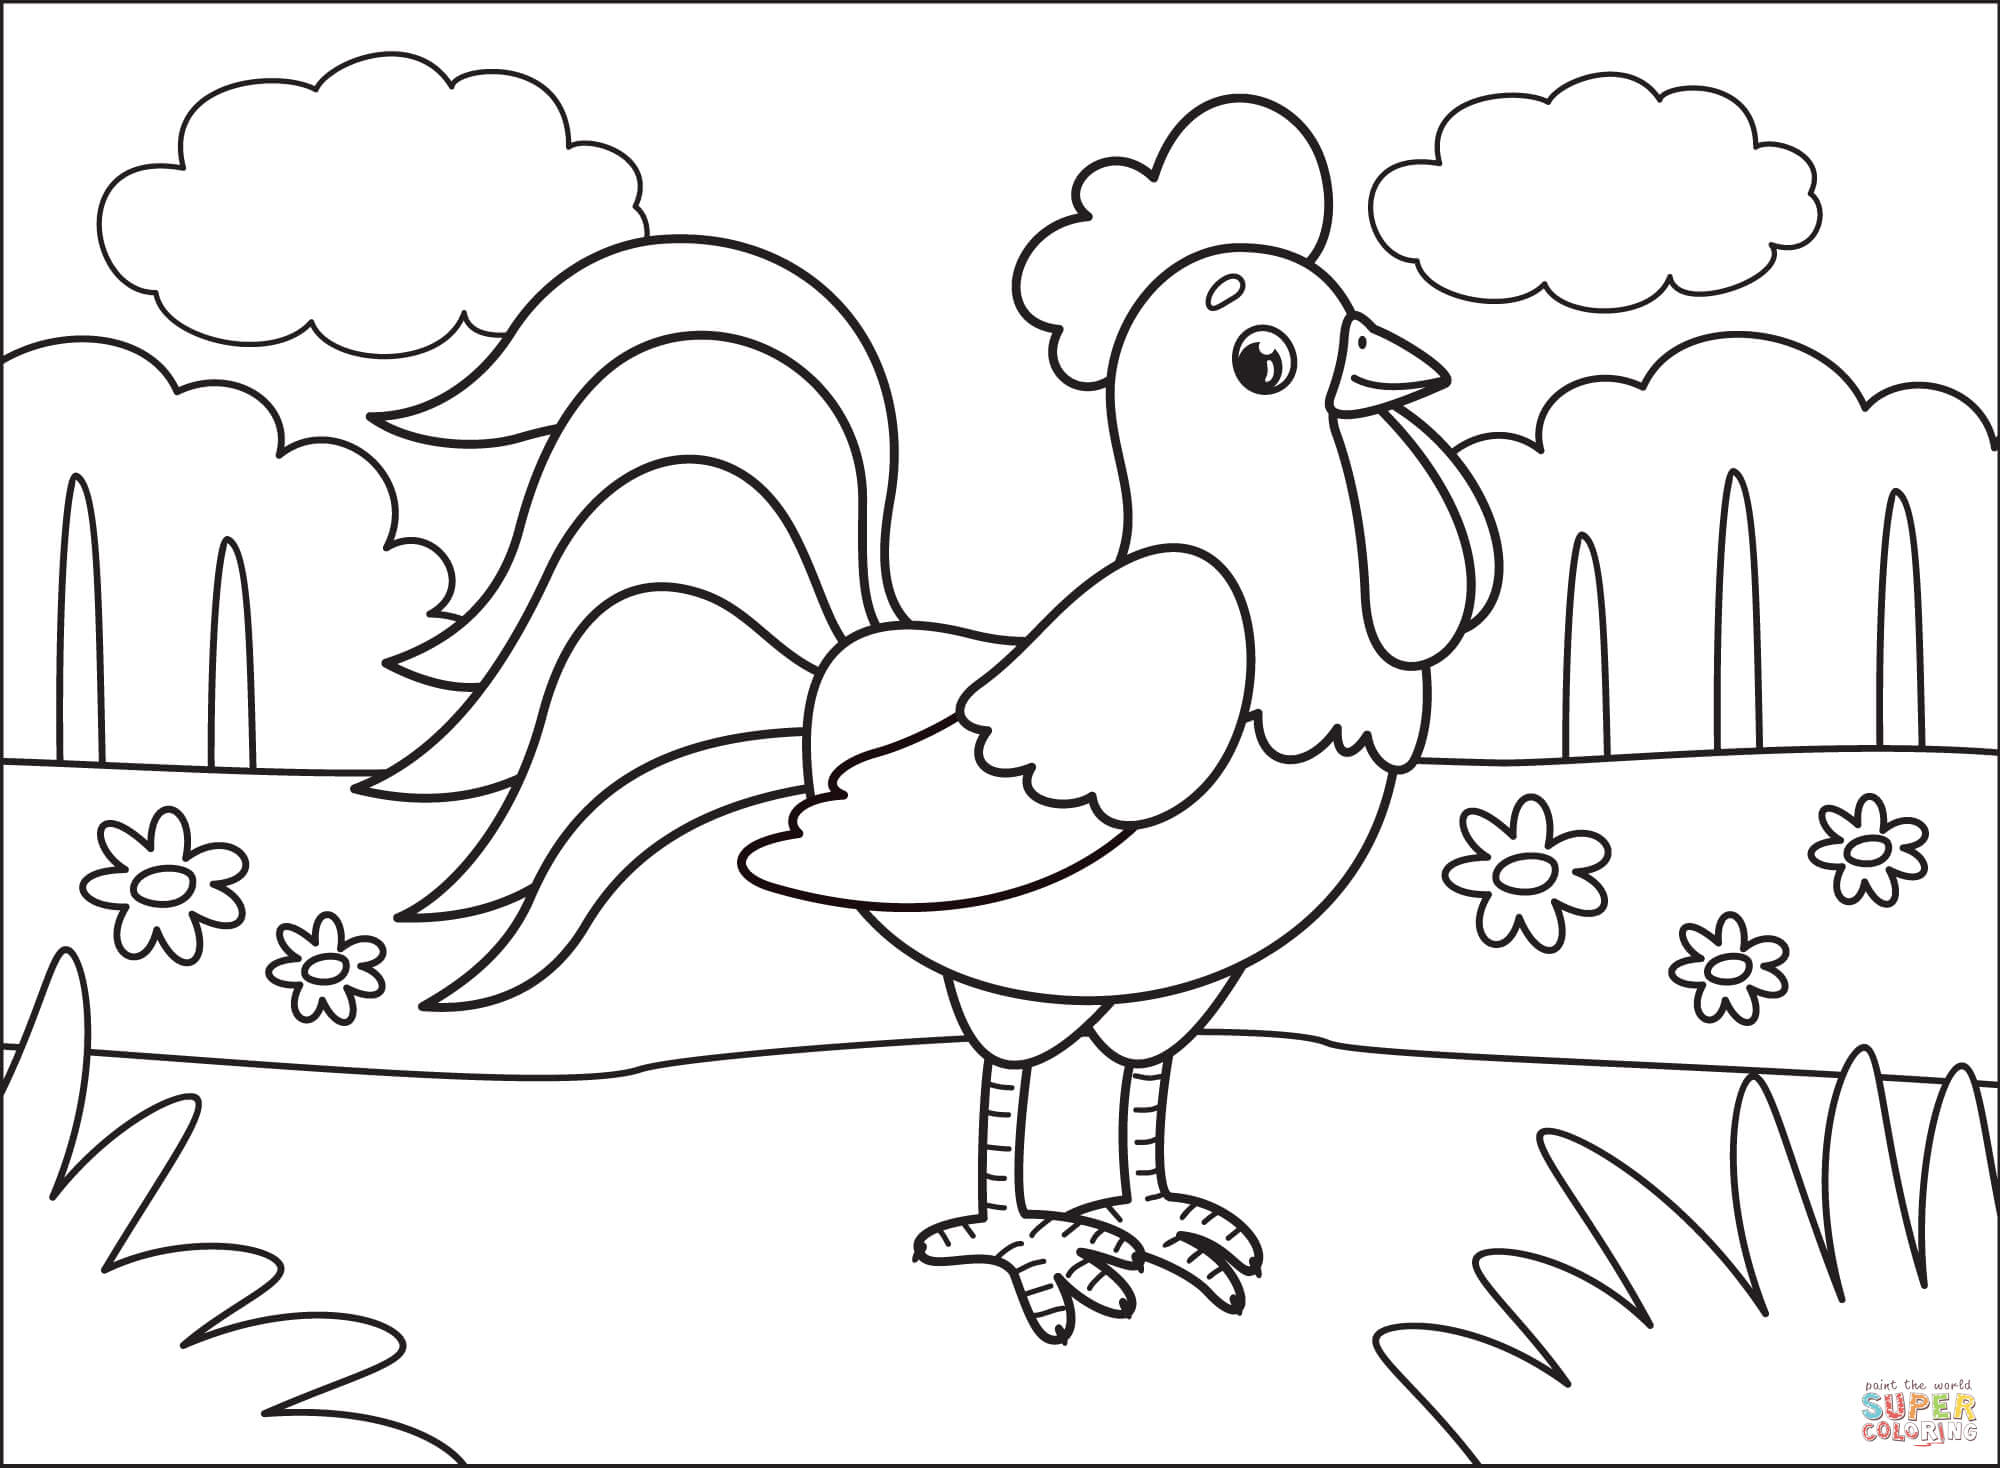 Rooster coloring page free printable coloring pages